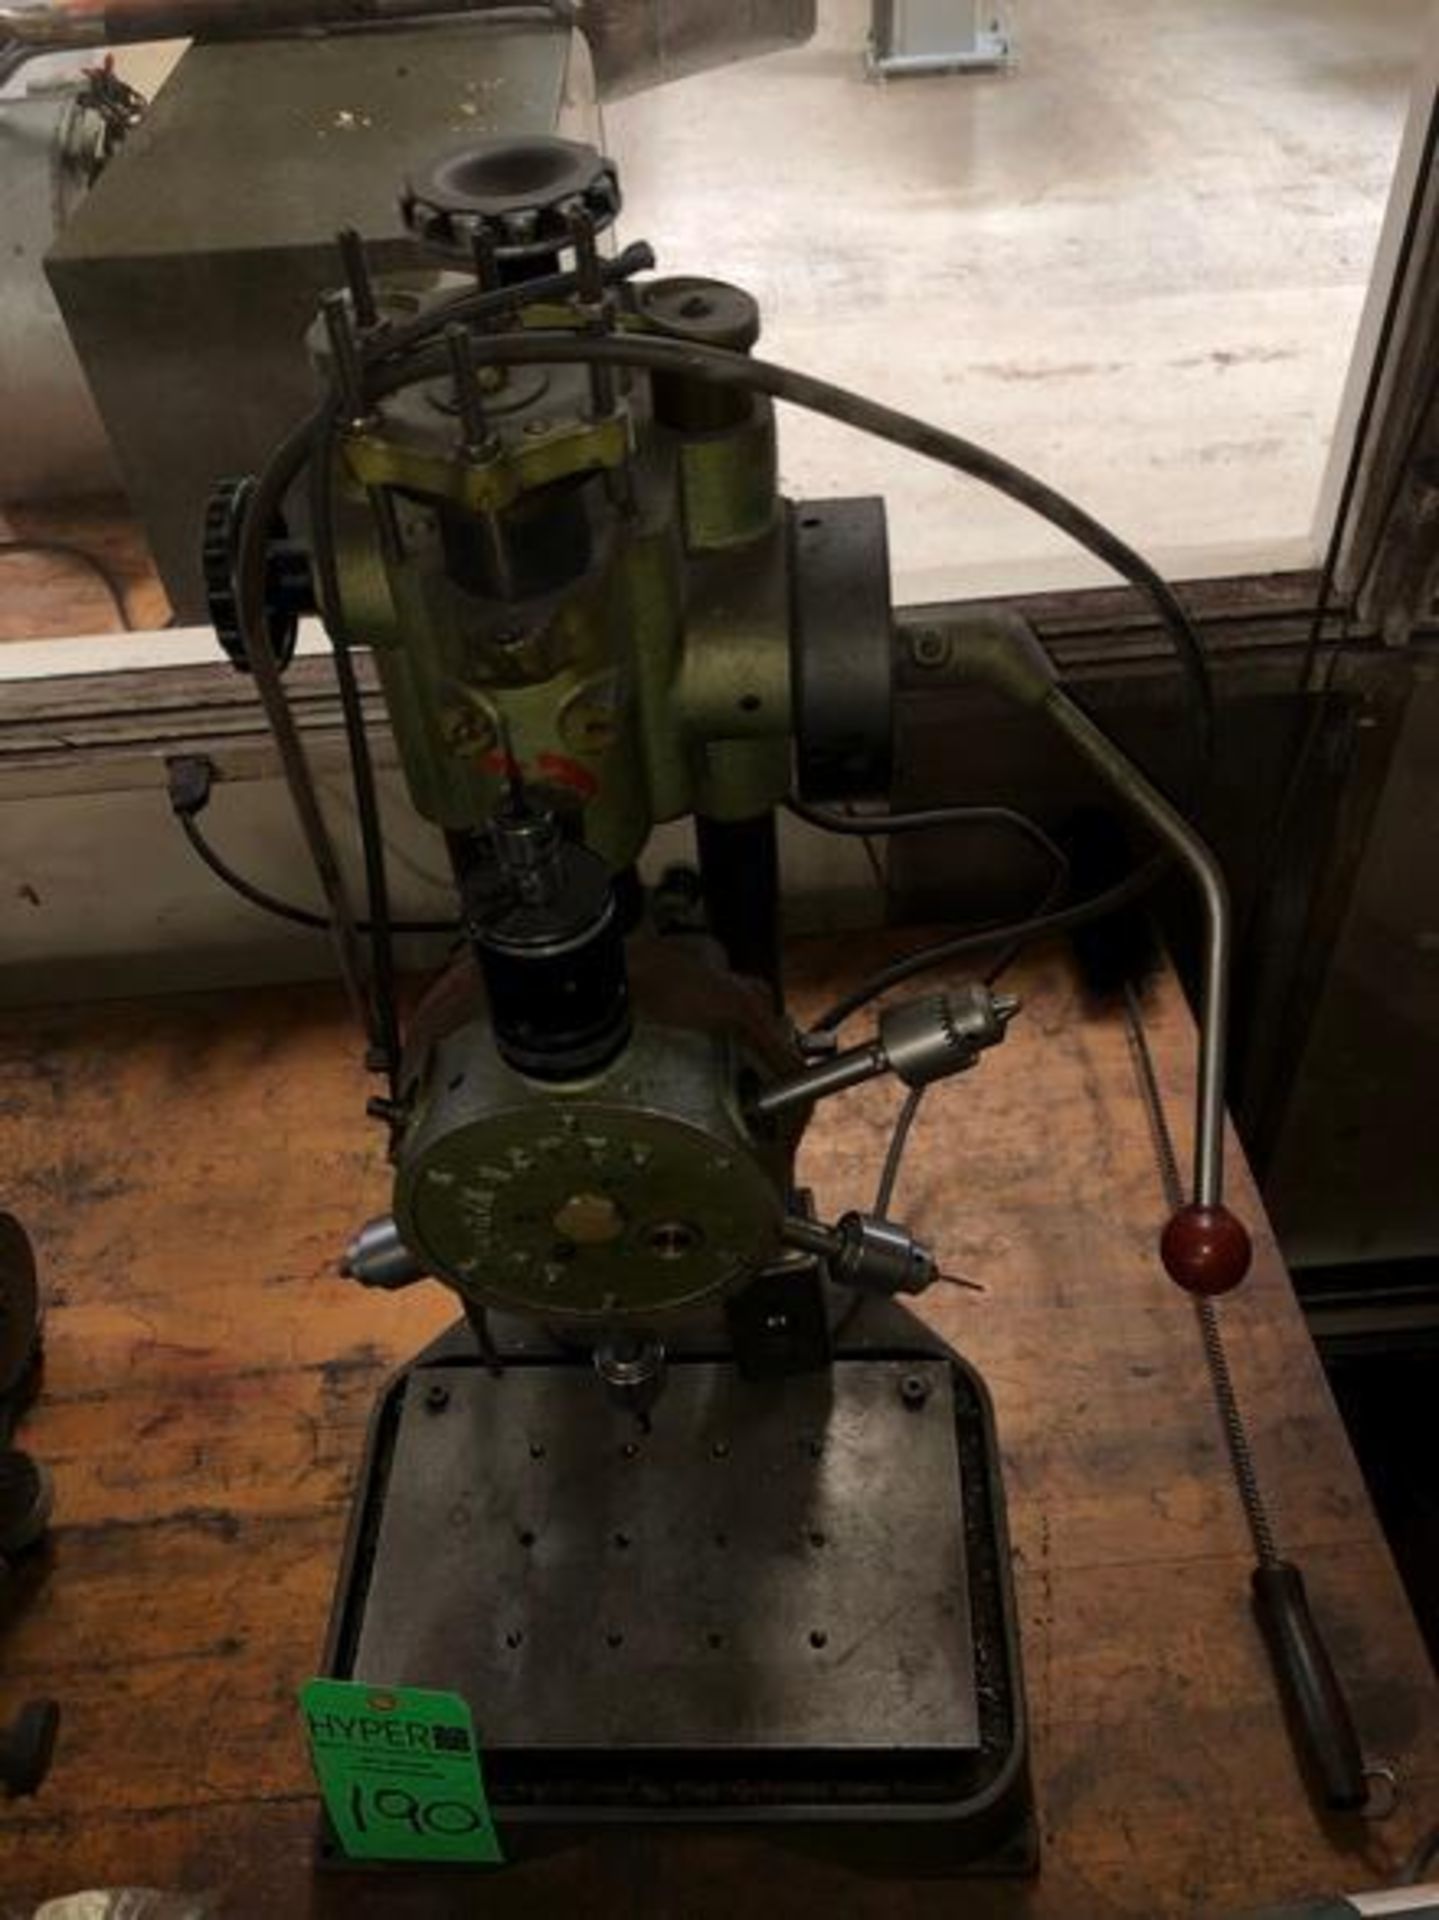 Burgmaster 6 Model OB Tapping Drilling station Spindle Turret Drill Press 1/3 HP - Image 4 of 6